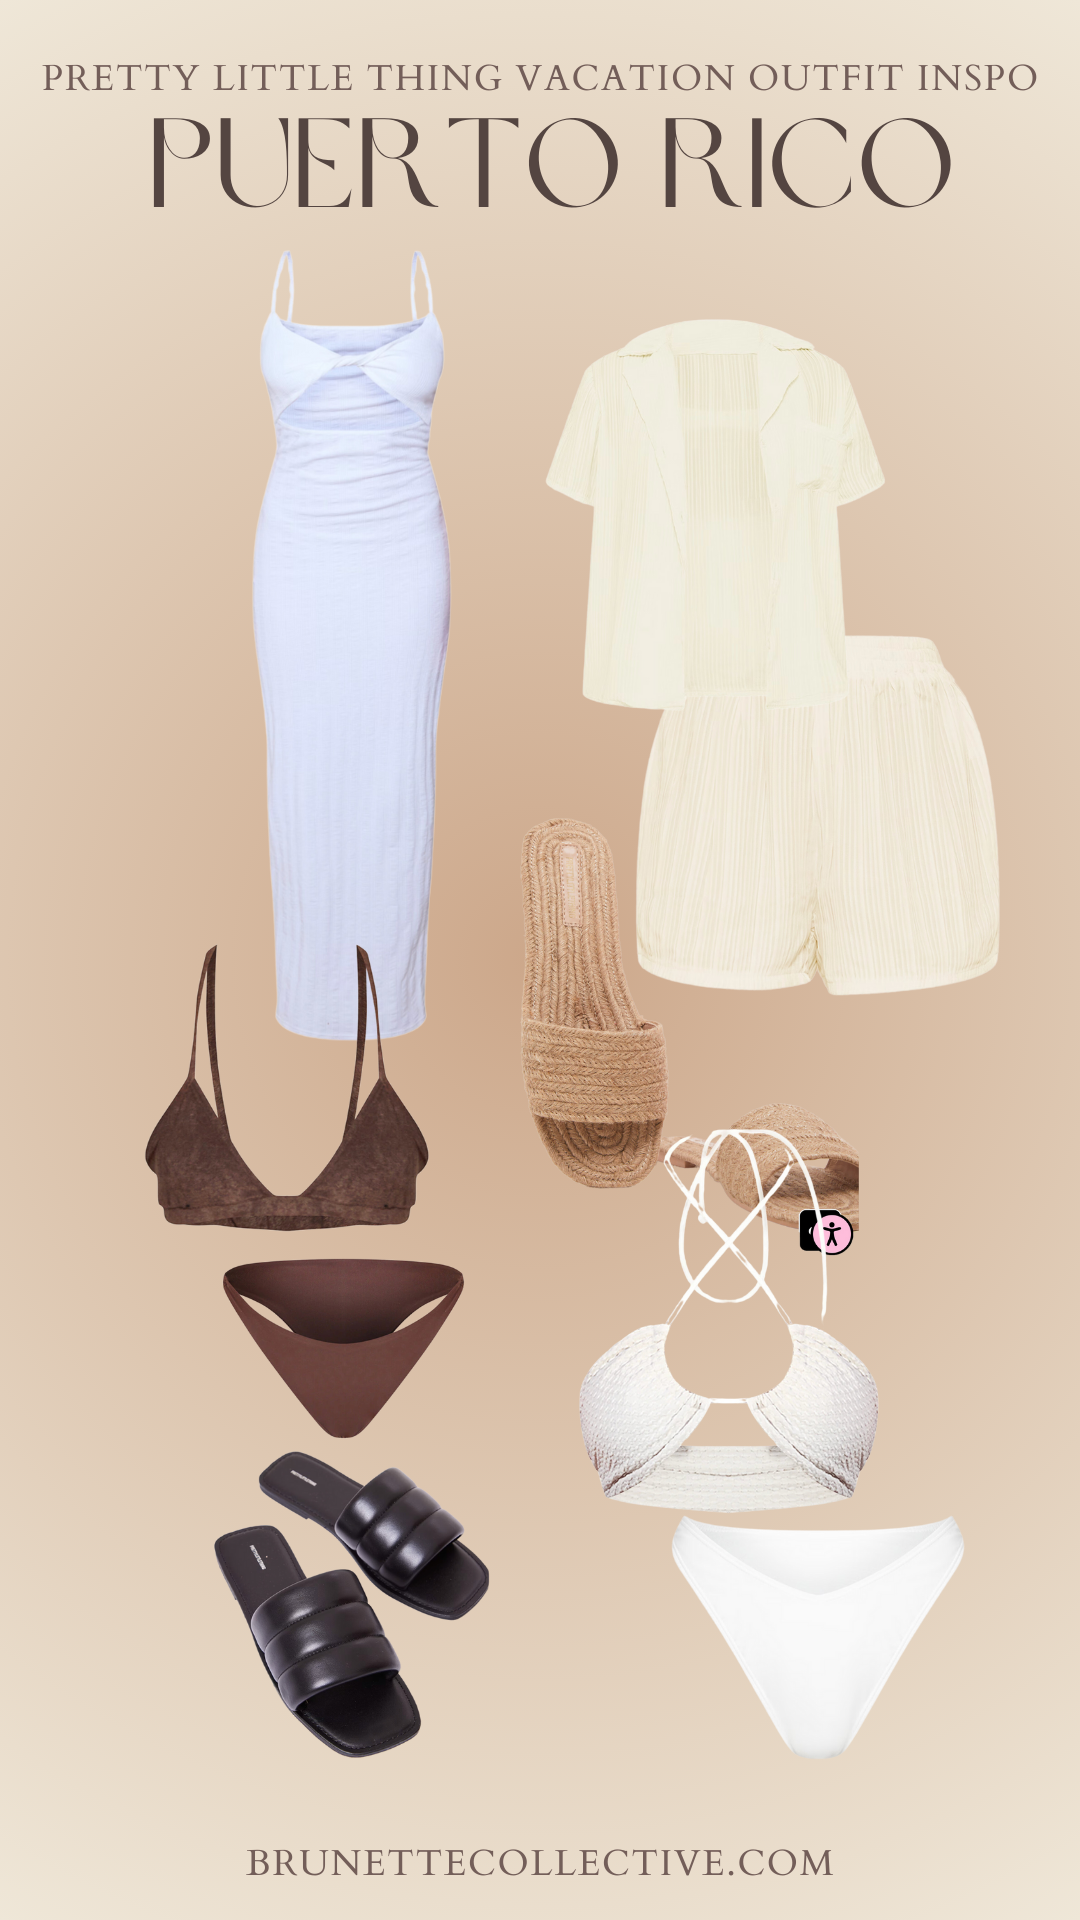 A GRAPHIC SHOWING NEUTRAL OUTFIT IDEAS FOR A TRIP, NEUTRAL outfits